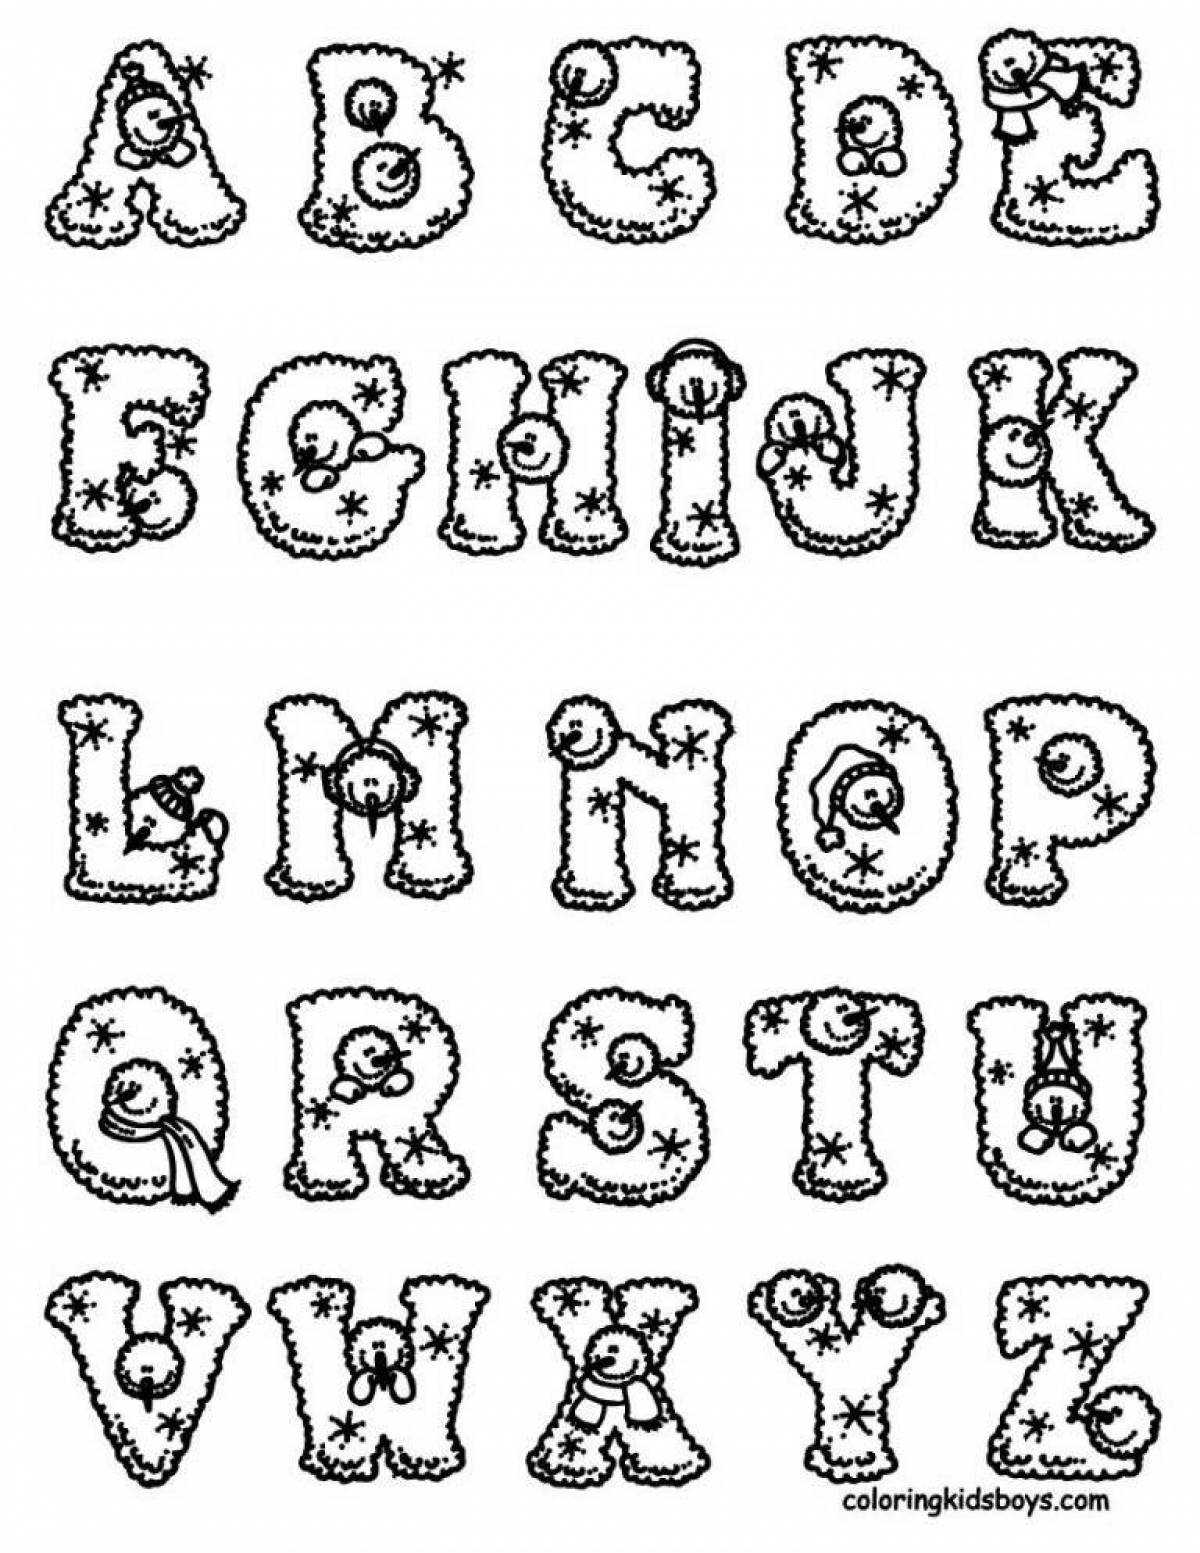 Exciting alphabet knowledge coloring page